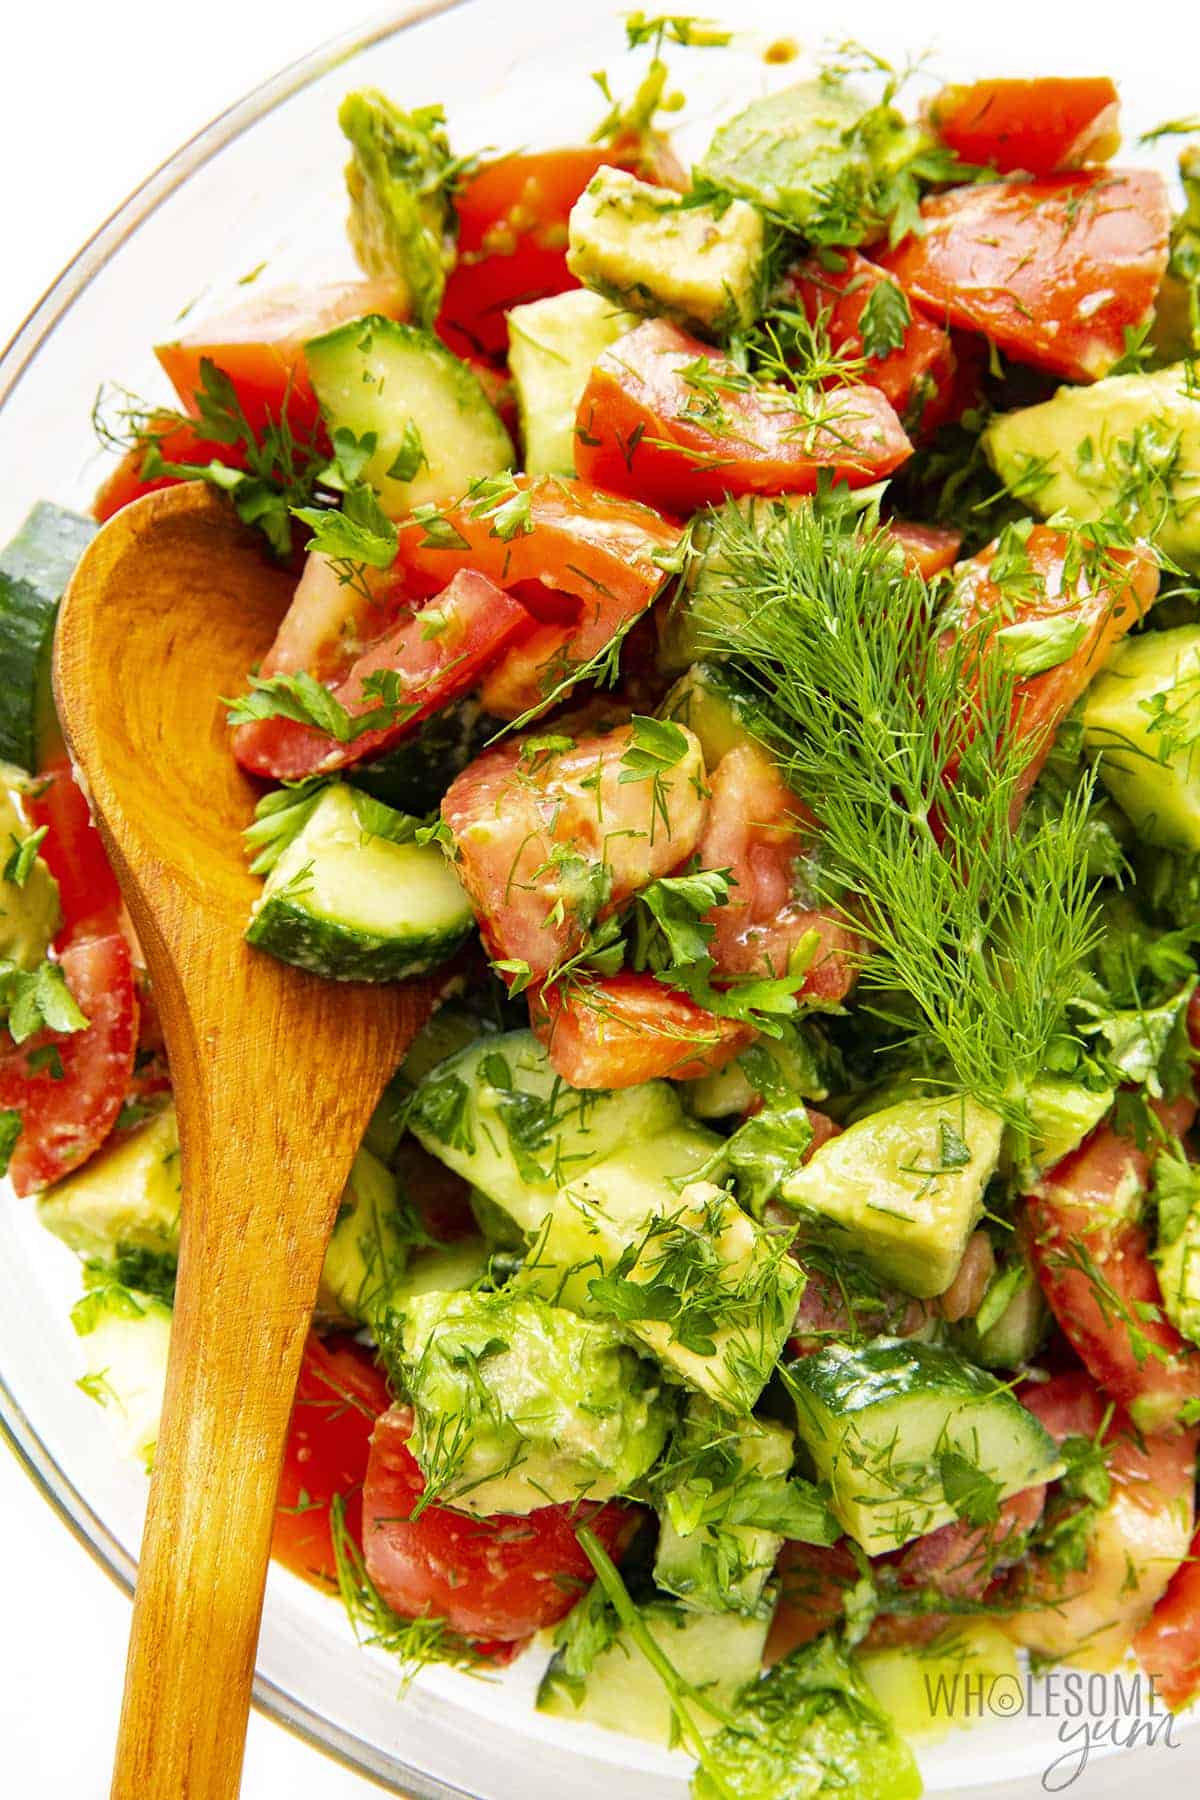 Salad with tomato, cucumber, and avocado in a bowl